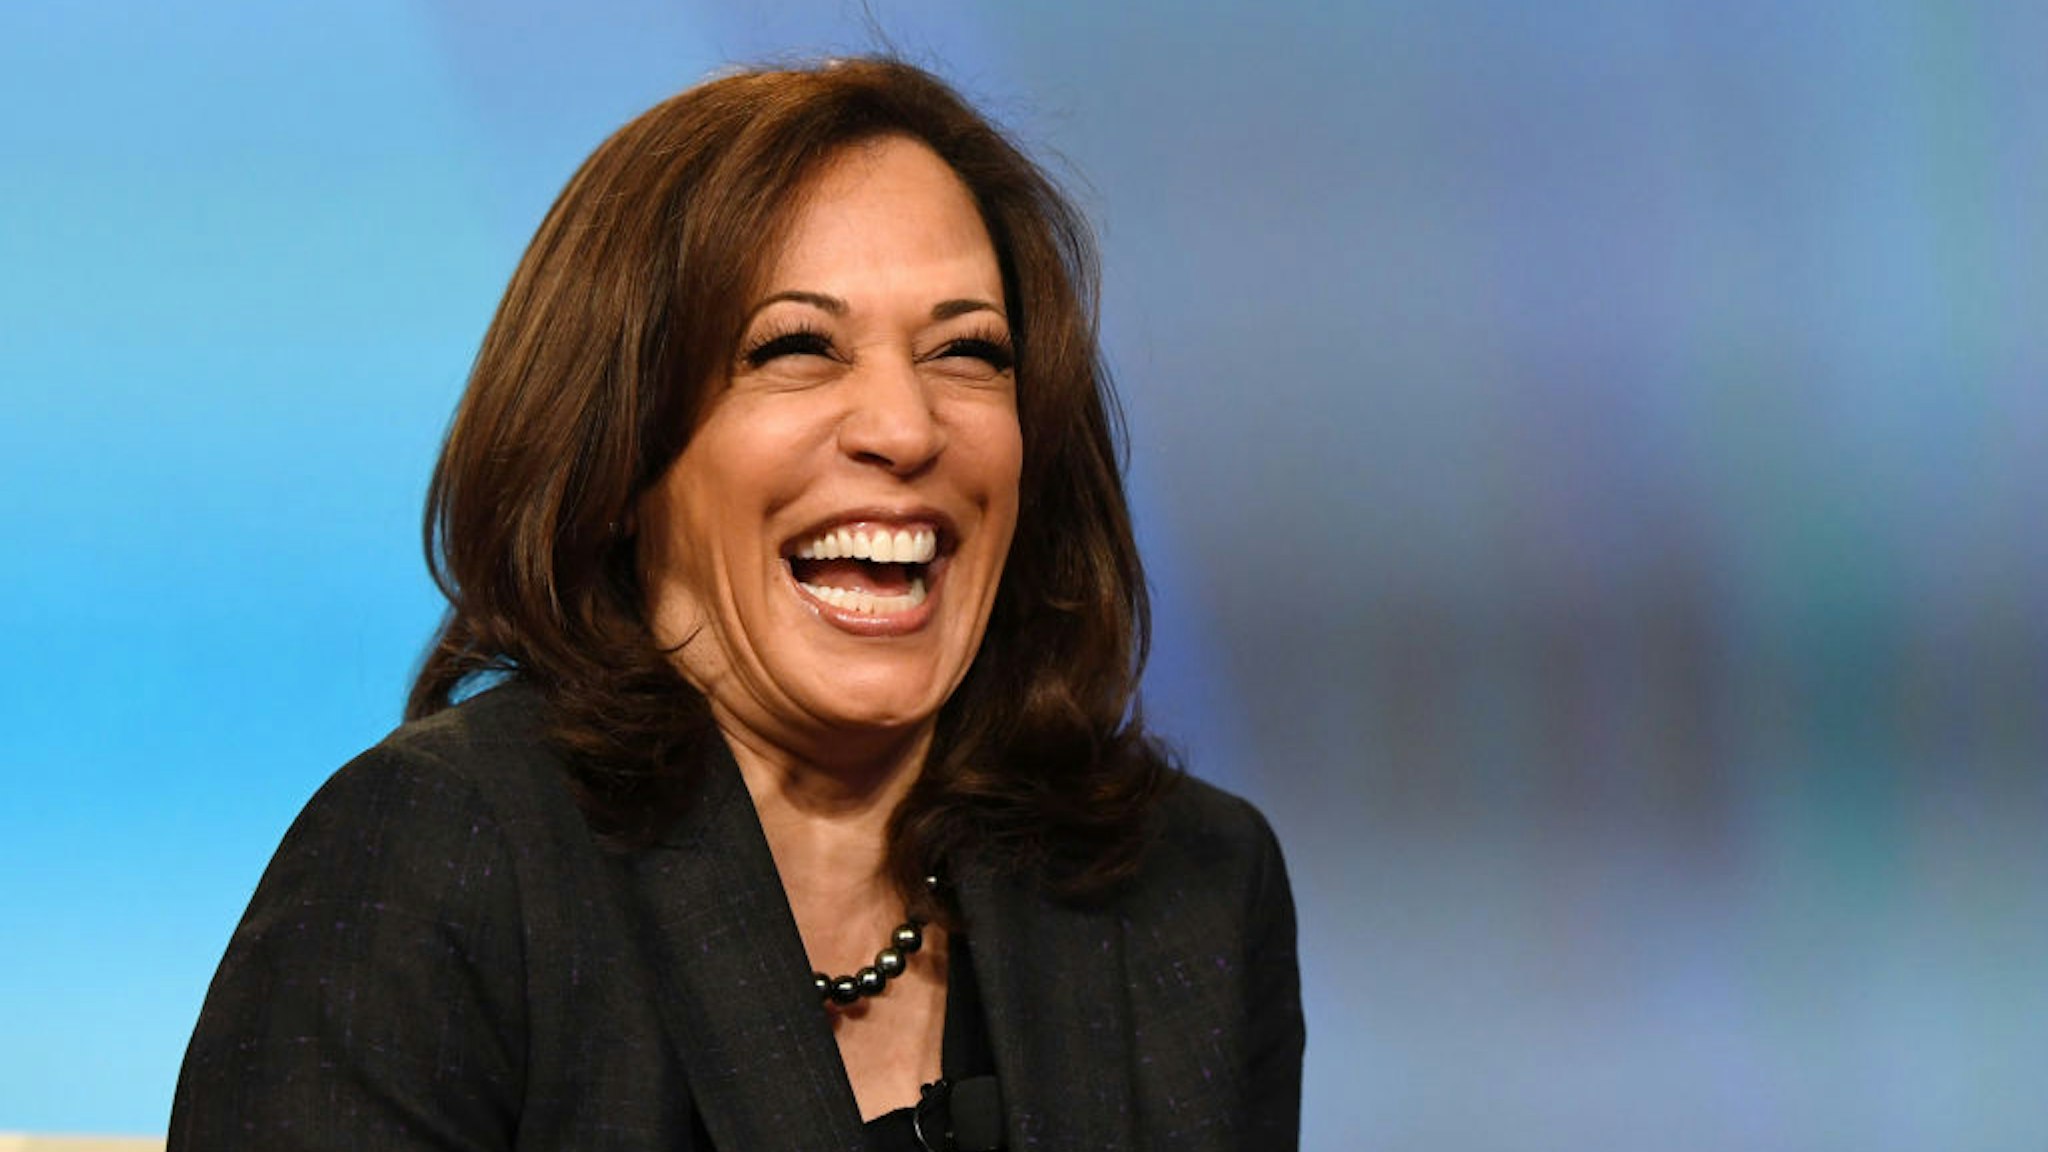 LAS VEGAS, NEVADA - MARCH 01: U.S. Sen. Kamala Harris (D-CA) laughs while speaking at the "Conversations that Count" event during the Black Enterprise Women of Power Summit at The Mirage Hotel &amp; Casino on March 1, 2019 in Las Vegas, Nevada. Harris is campaigning for the 2020 Democratic nomination for president.